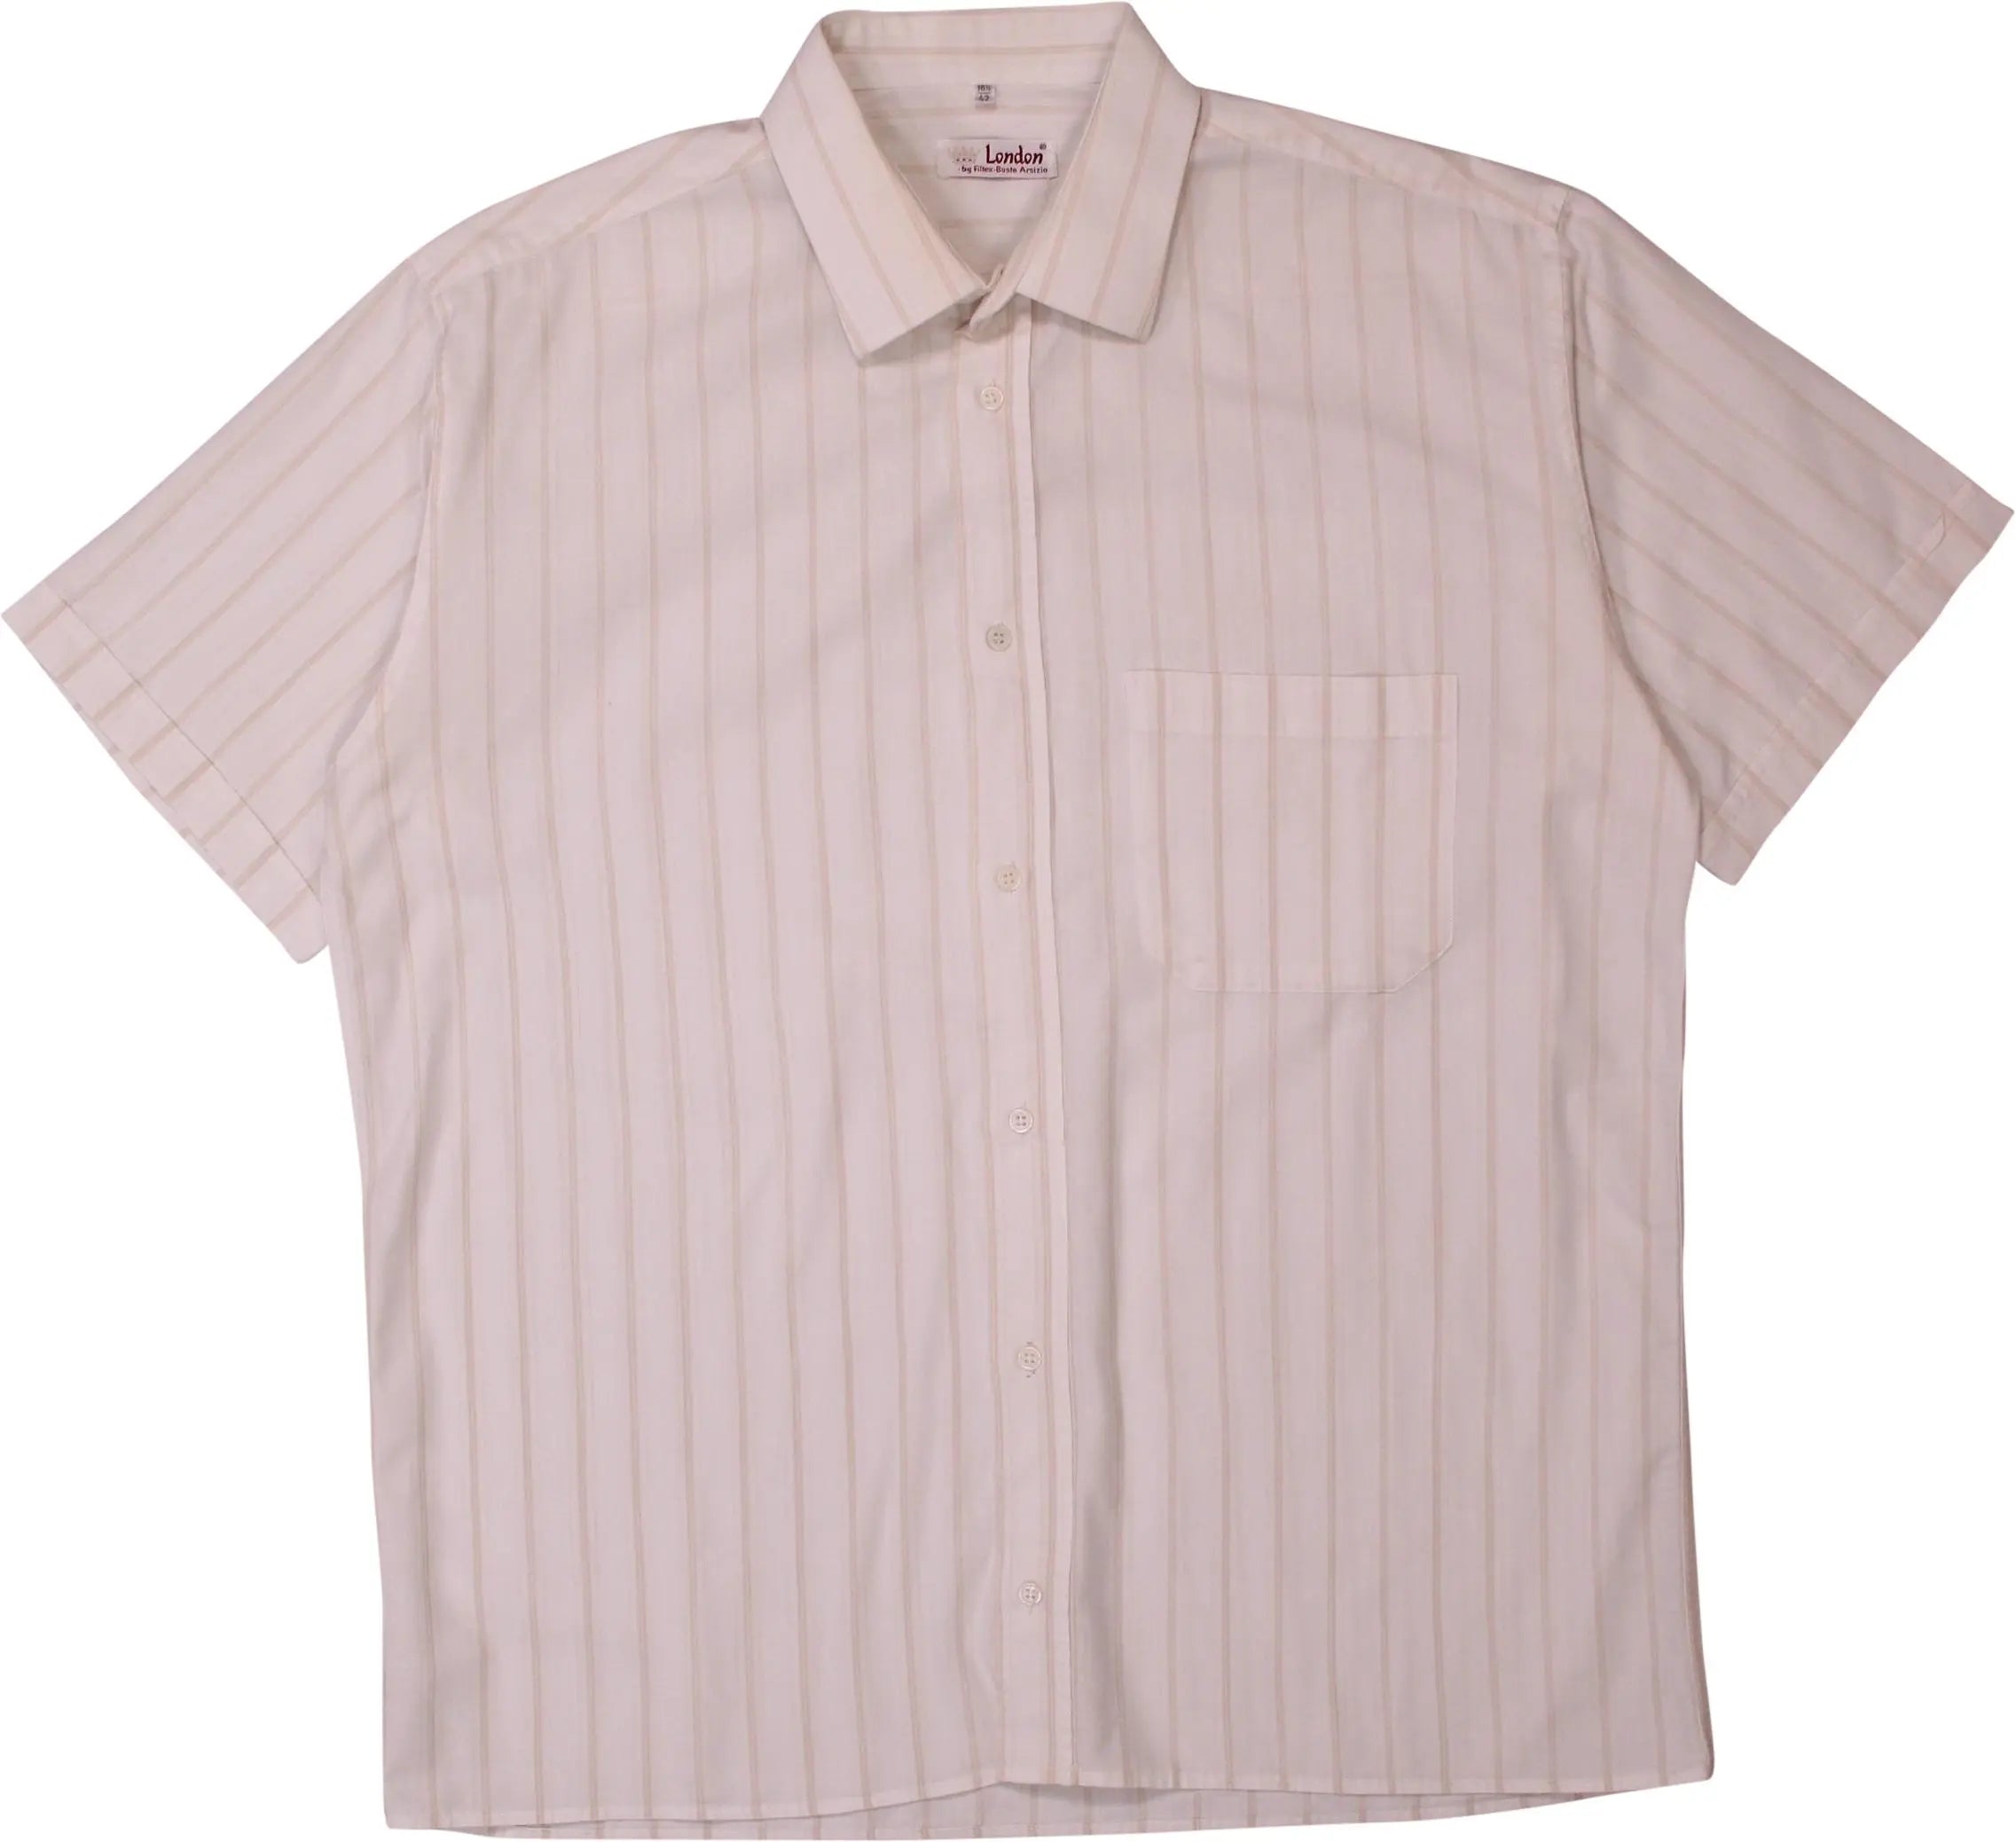 London - Striped Short Sleeve Shirt- ThriftTale.com - Vintage and second handclothing